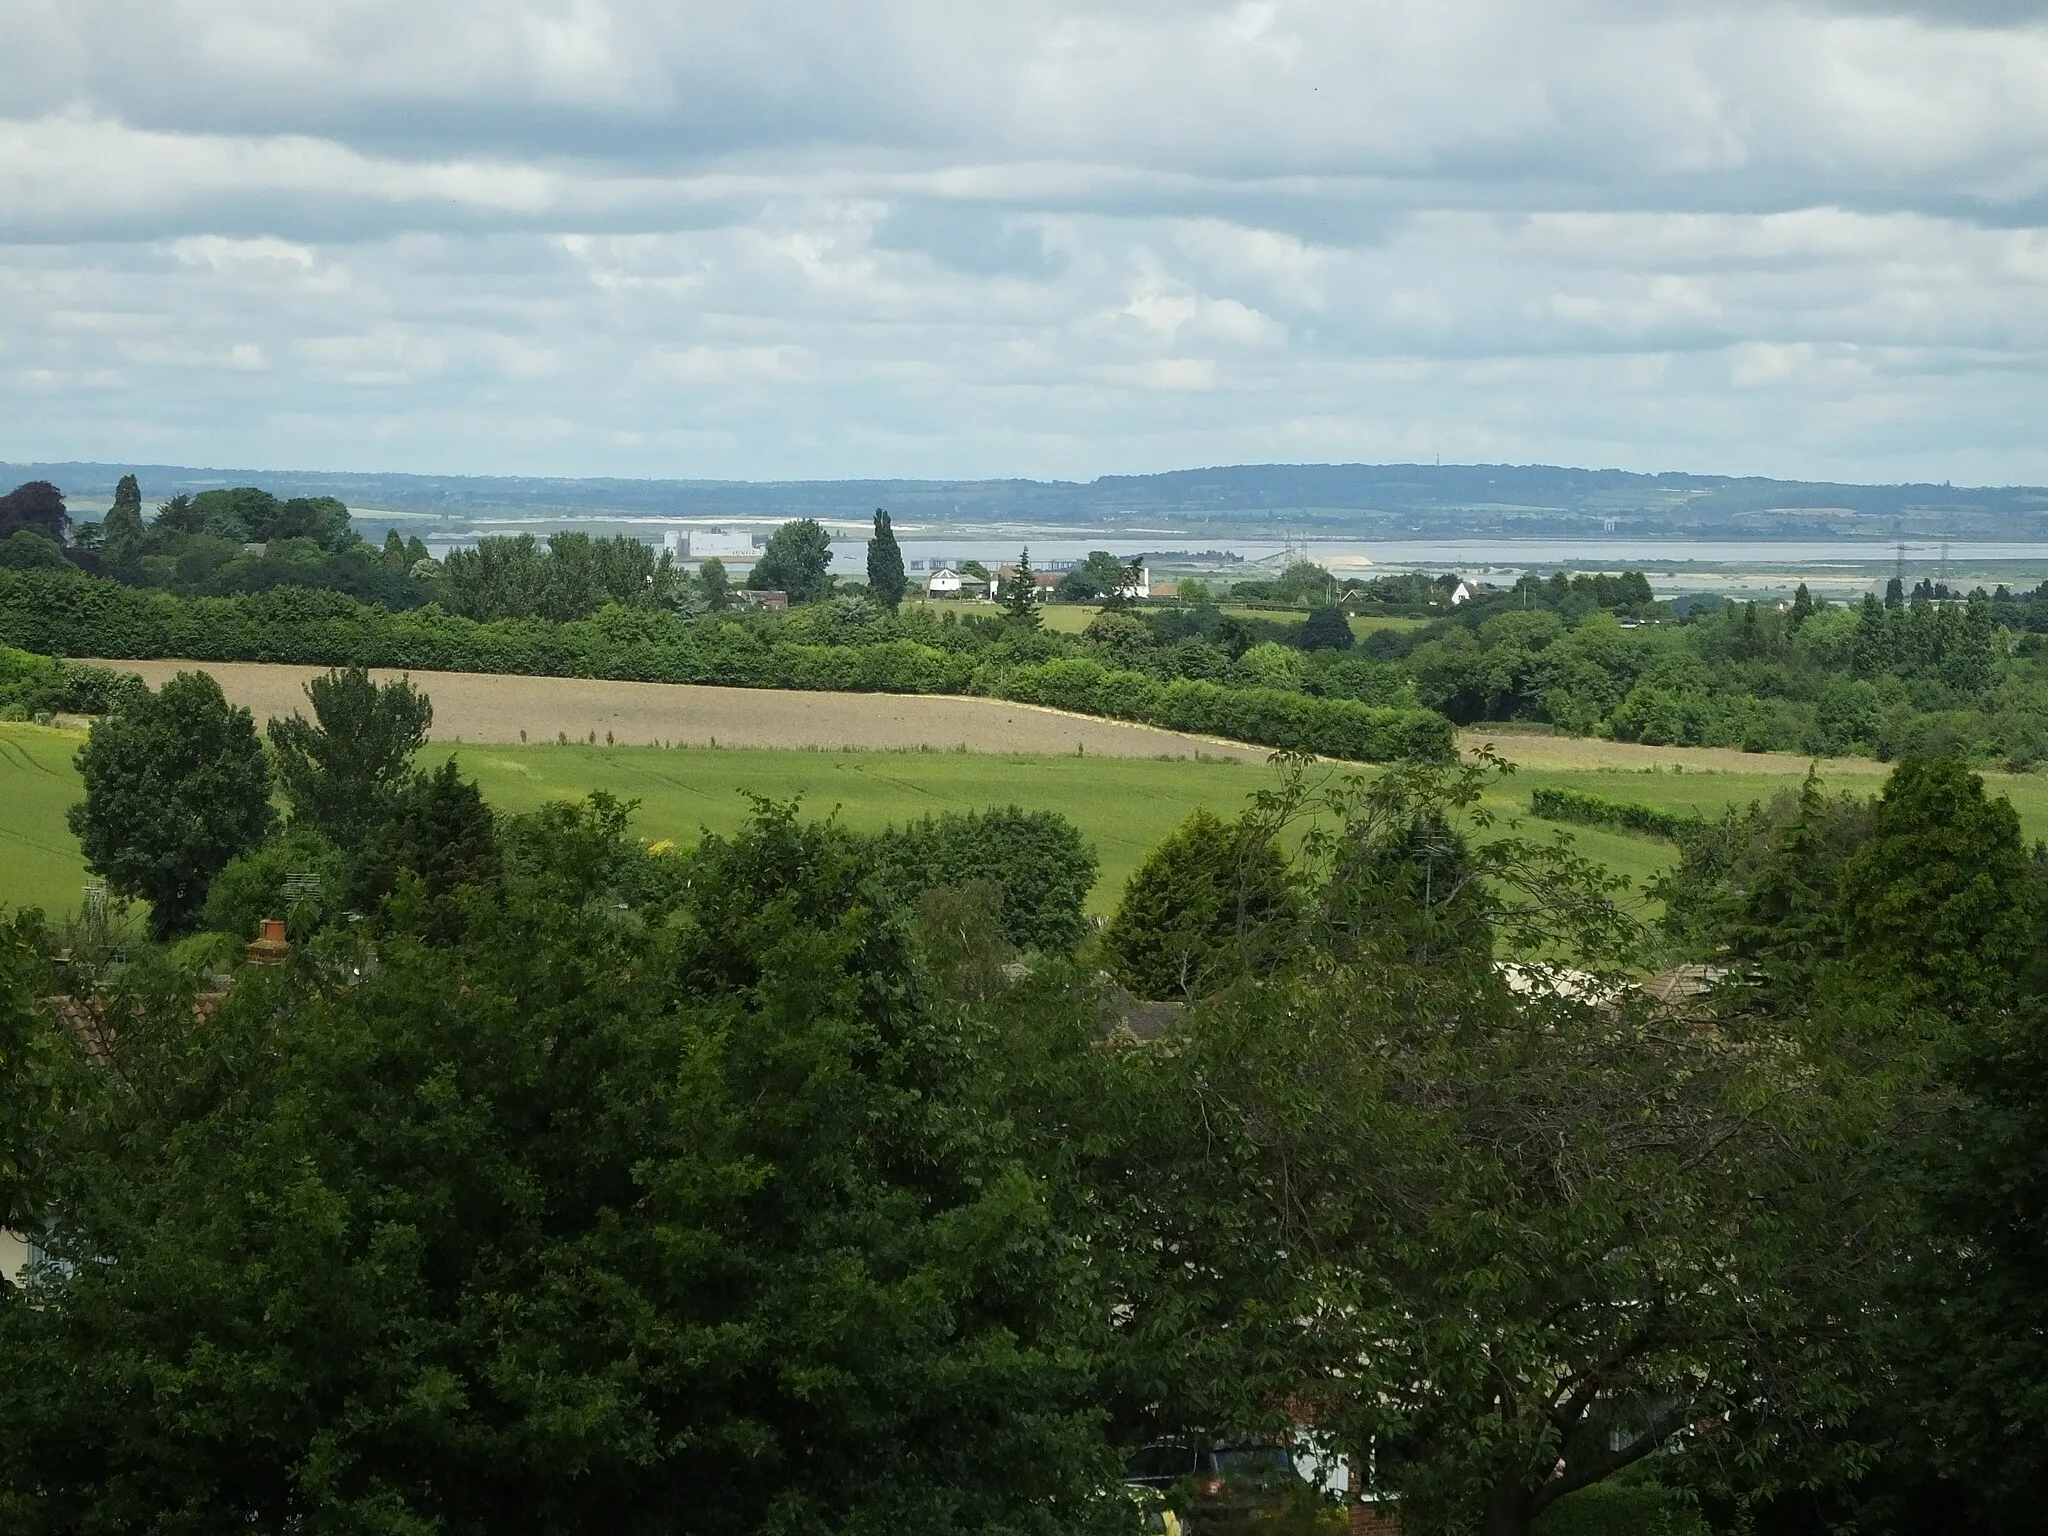 Photo showing: The Broomhill Park is a community supported park in Strood, Kent. It features a view over the River Thames estuary and over the River Medway. The Thames view.